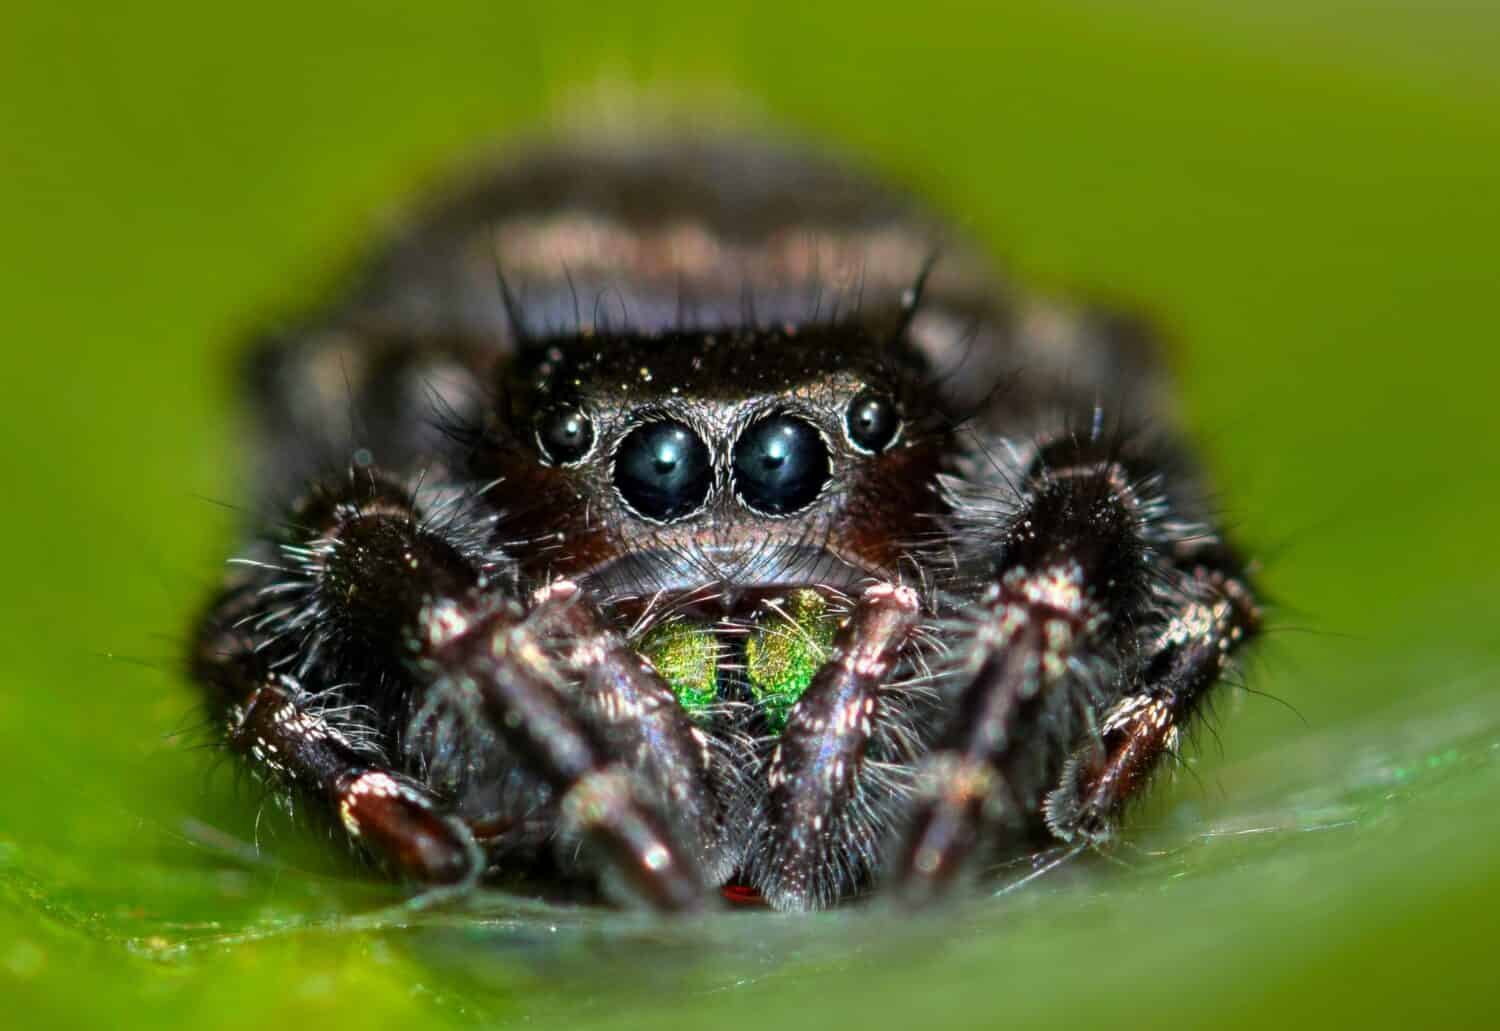 Bold Jumping Spider, or Daring Jumping Spider (Phidippus audax) looks at the camera from the relative safety of its webbing on the leaf of a water plant.